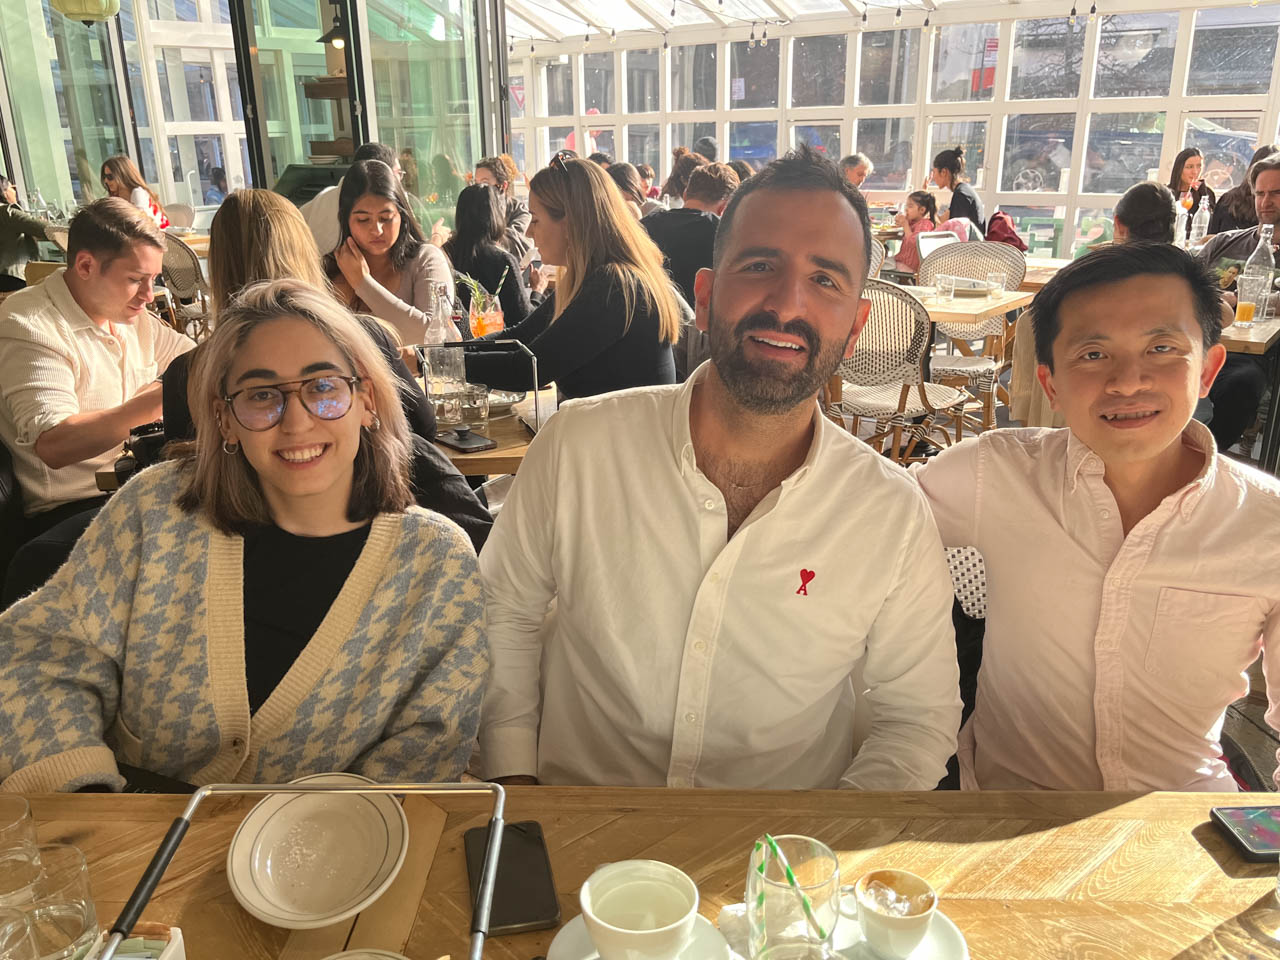 group photo of three people at a restaurant